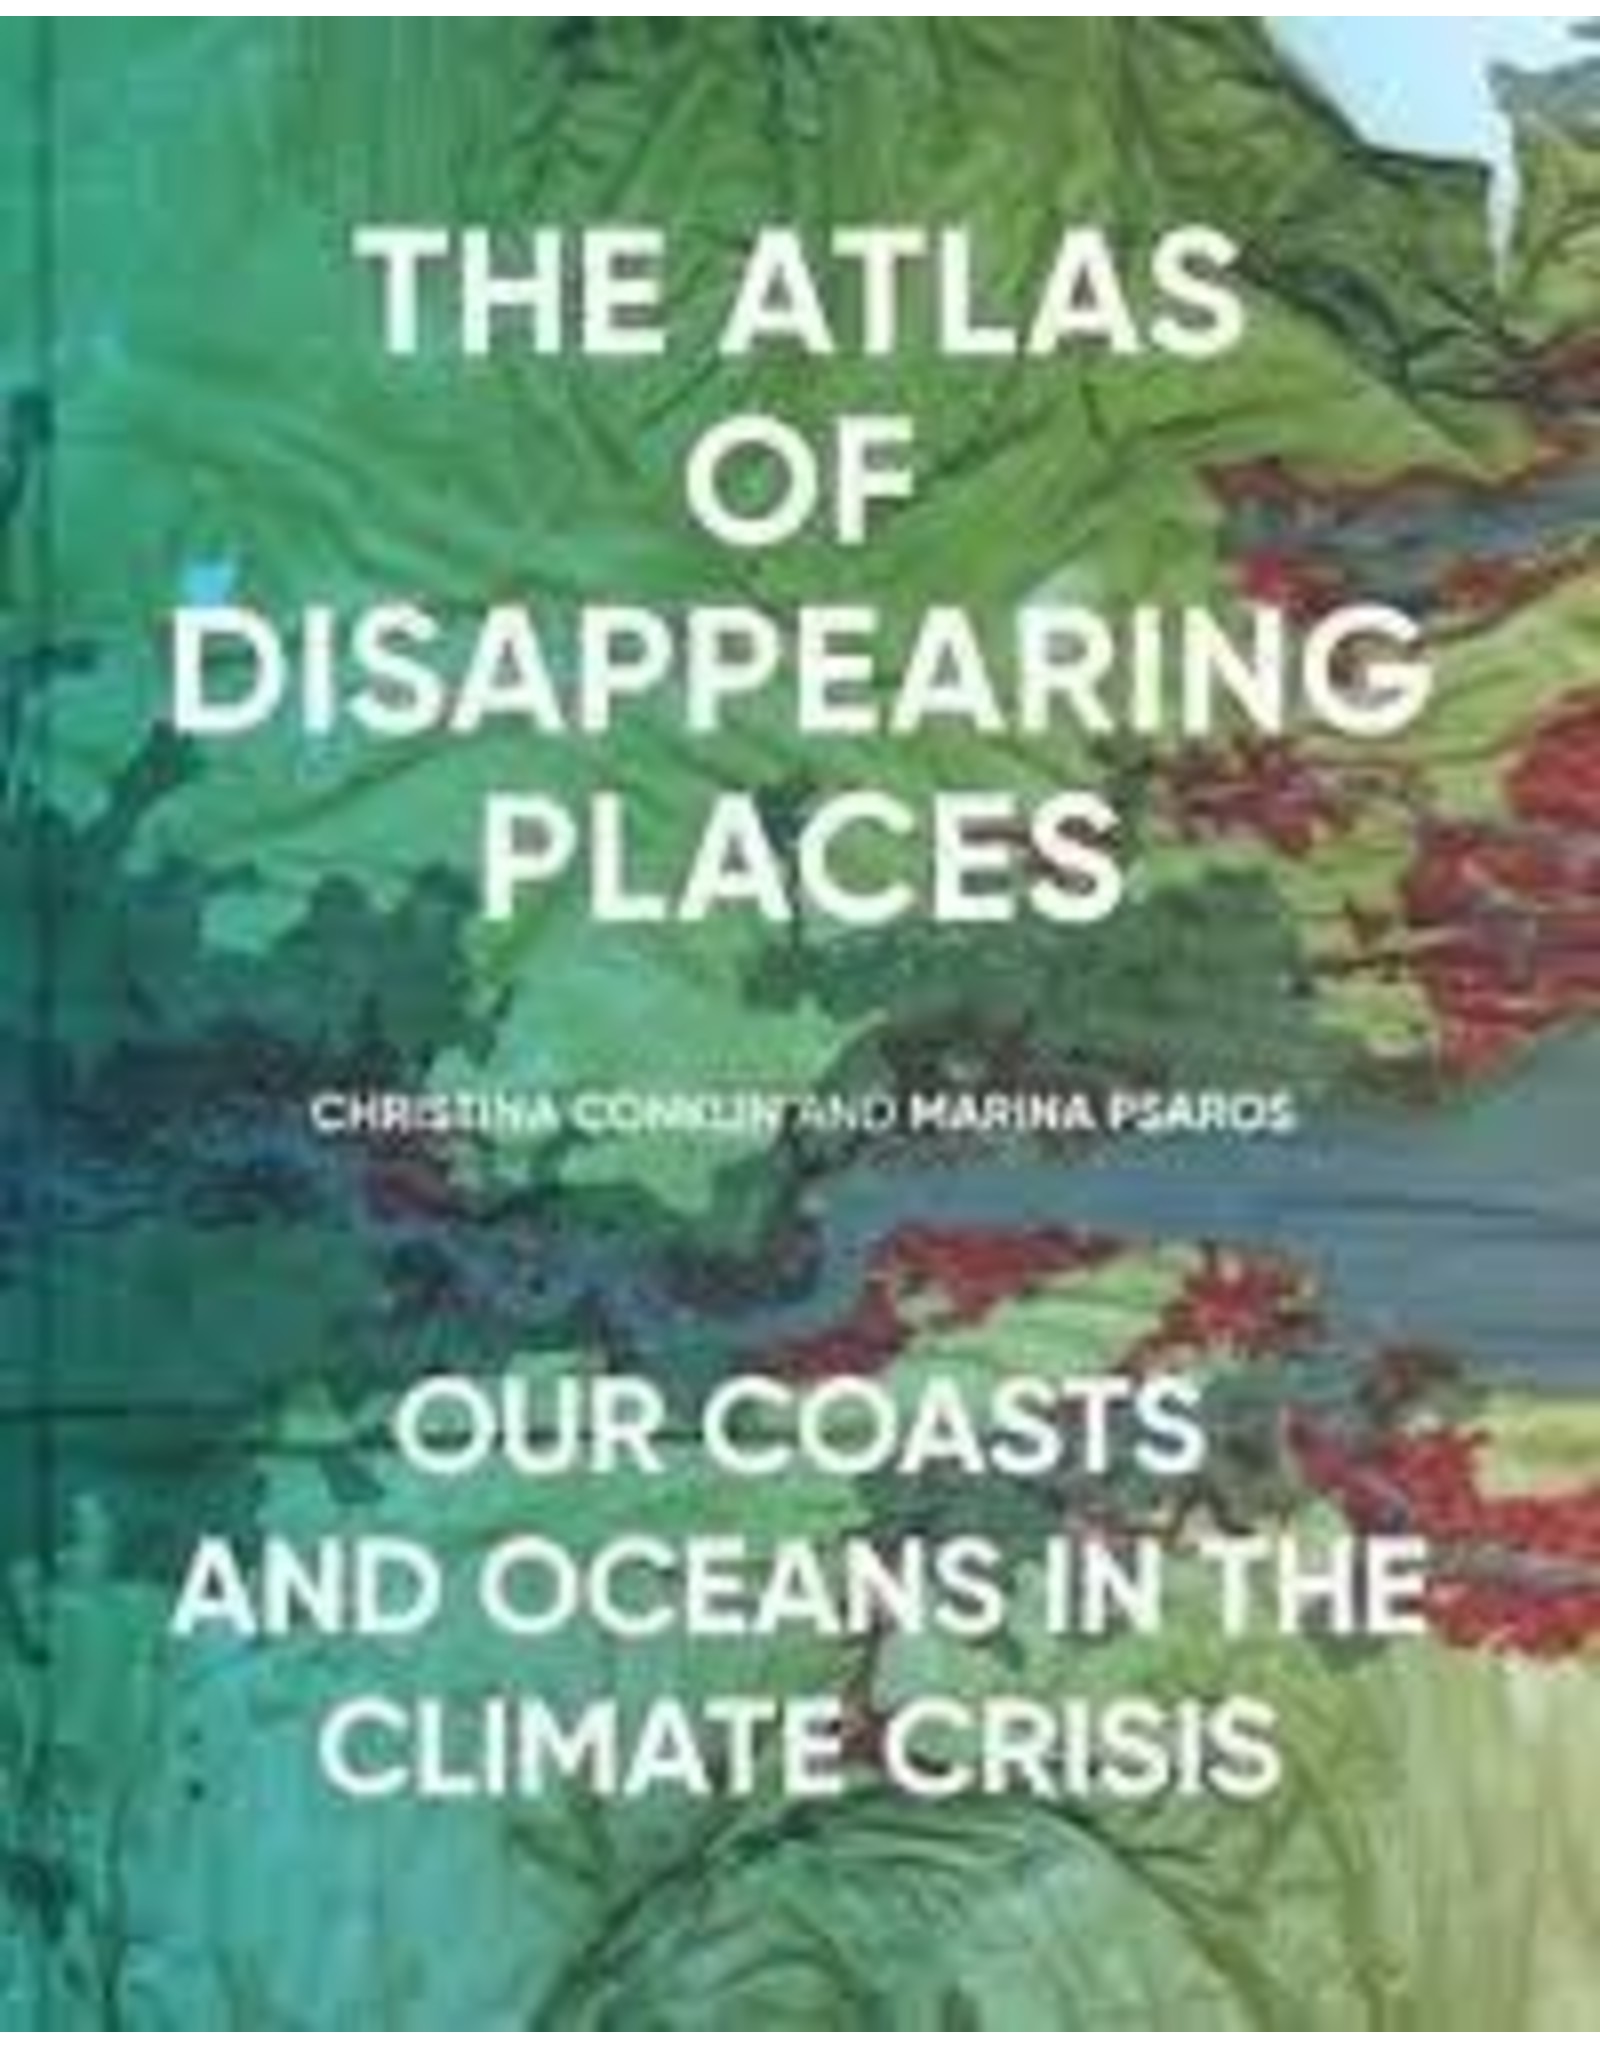 Books The Atlas of Disappearing Places: Our Coasts and Oceans in the Climate Crisis by Christina Conklin and Marina Psaros